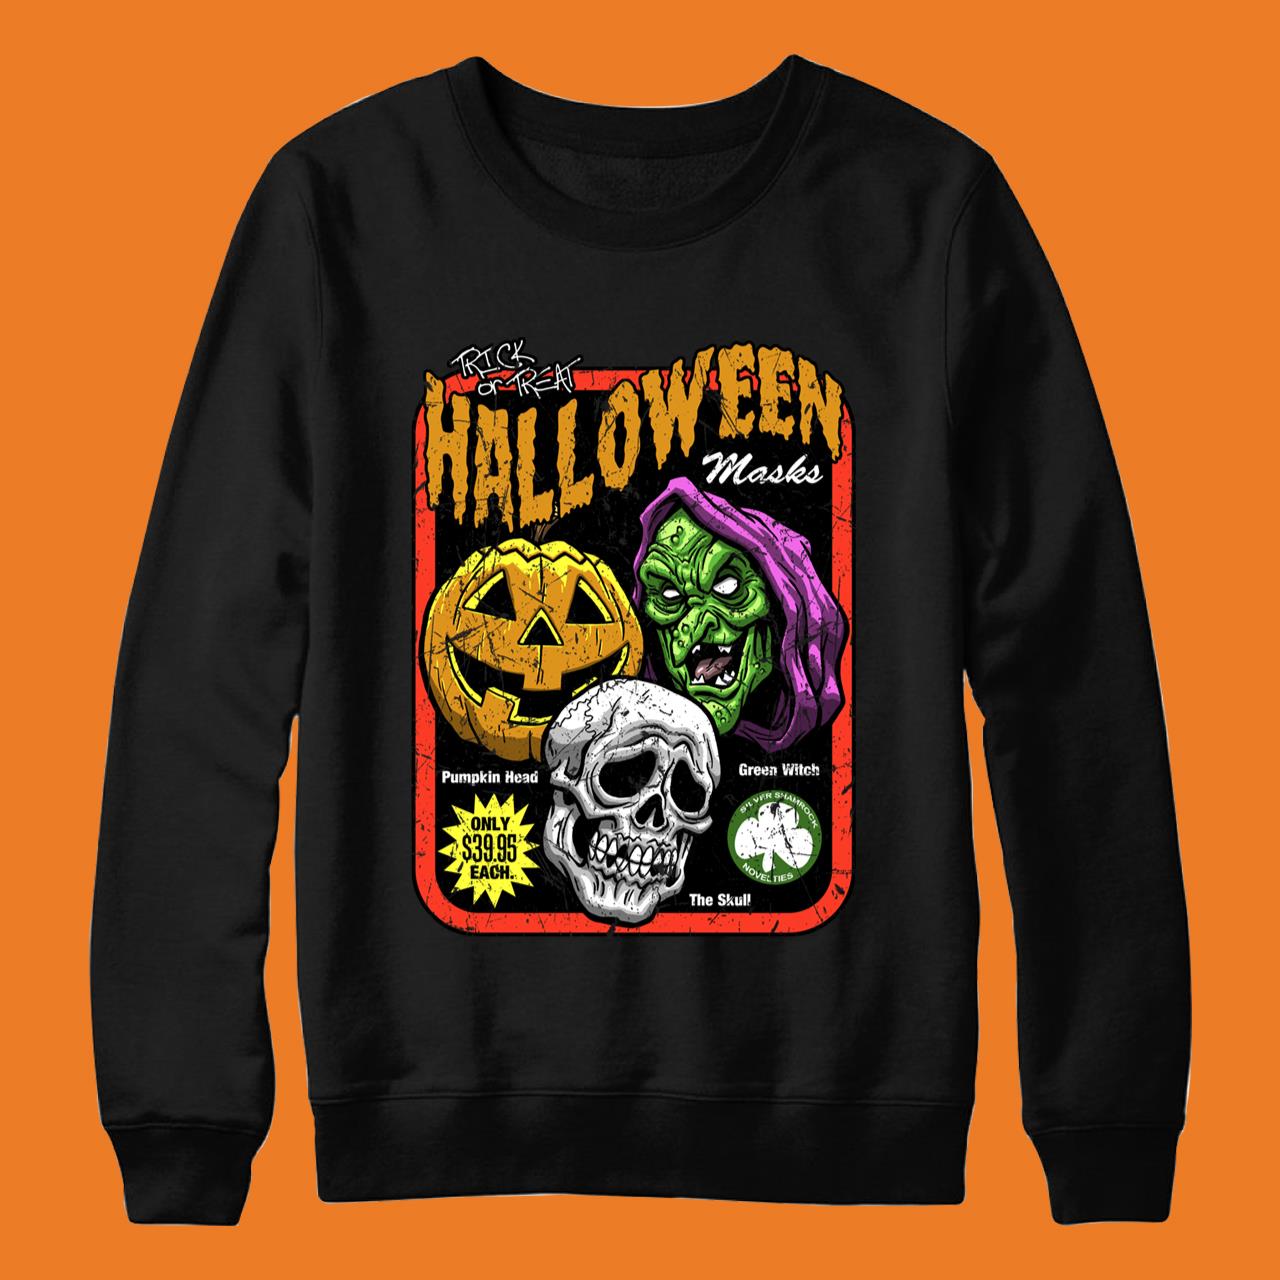 Season Of The Witch Halloween T-Shirt